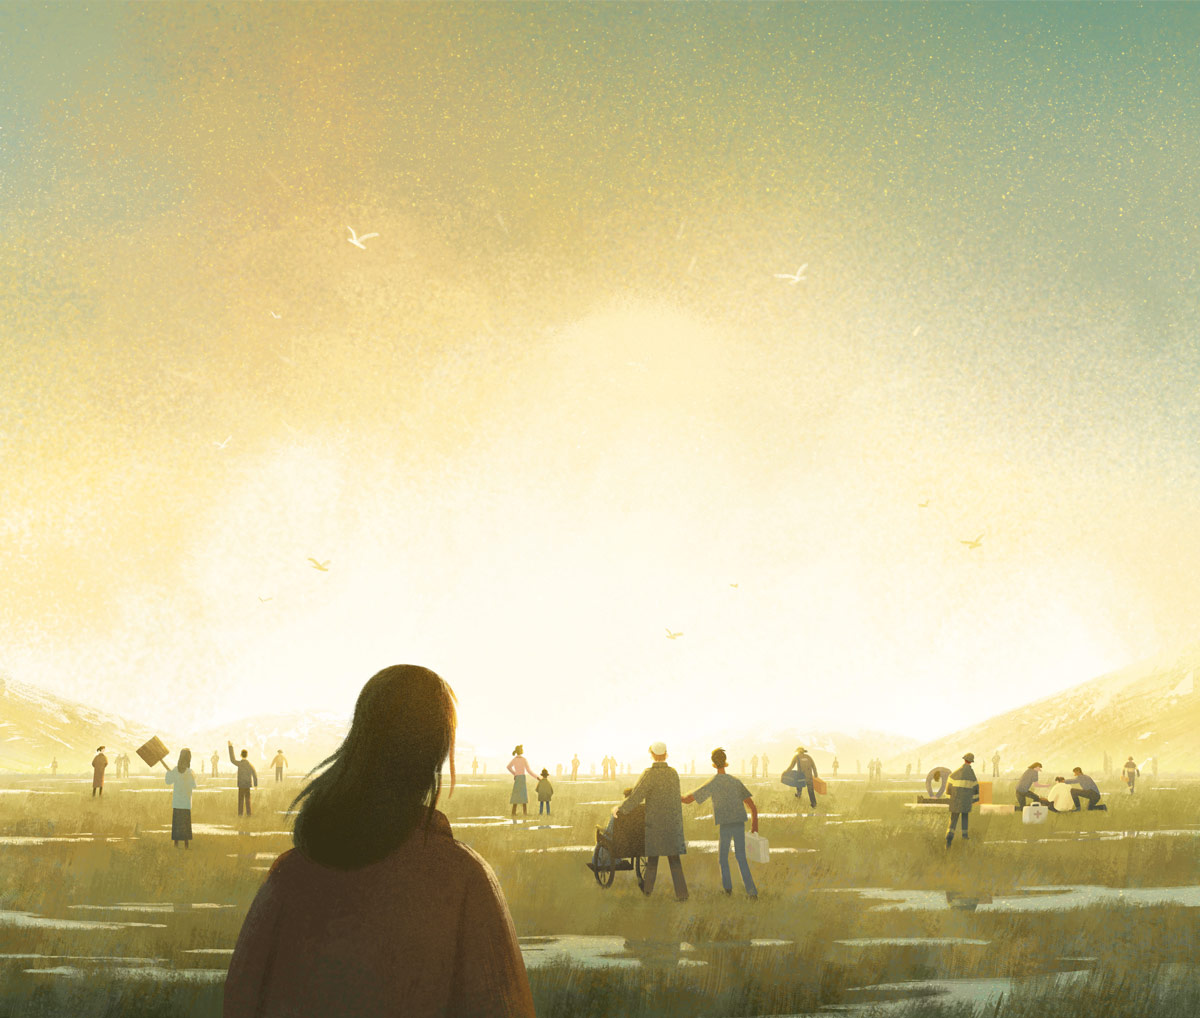 Digital painting of an imaginary landscape, with many people in a field approaching a glowing sky